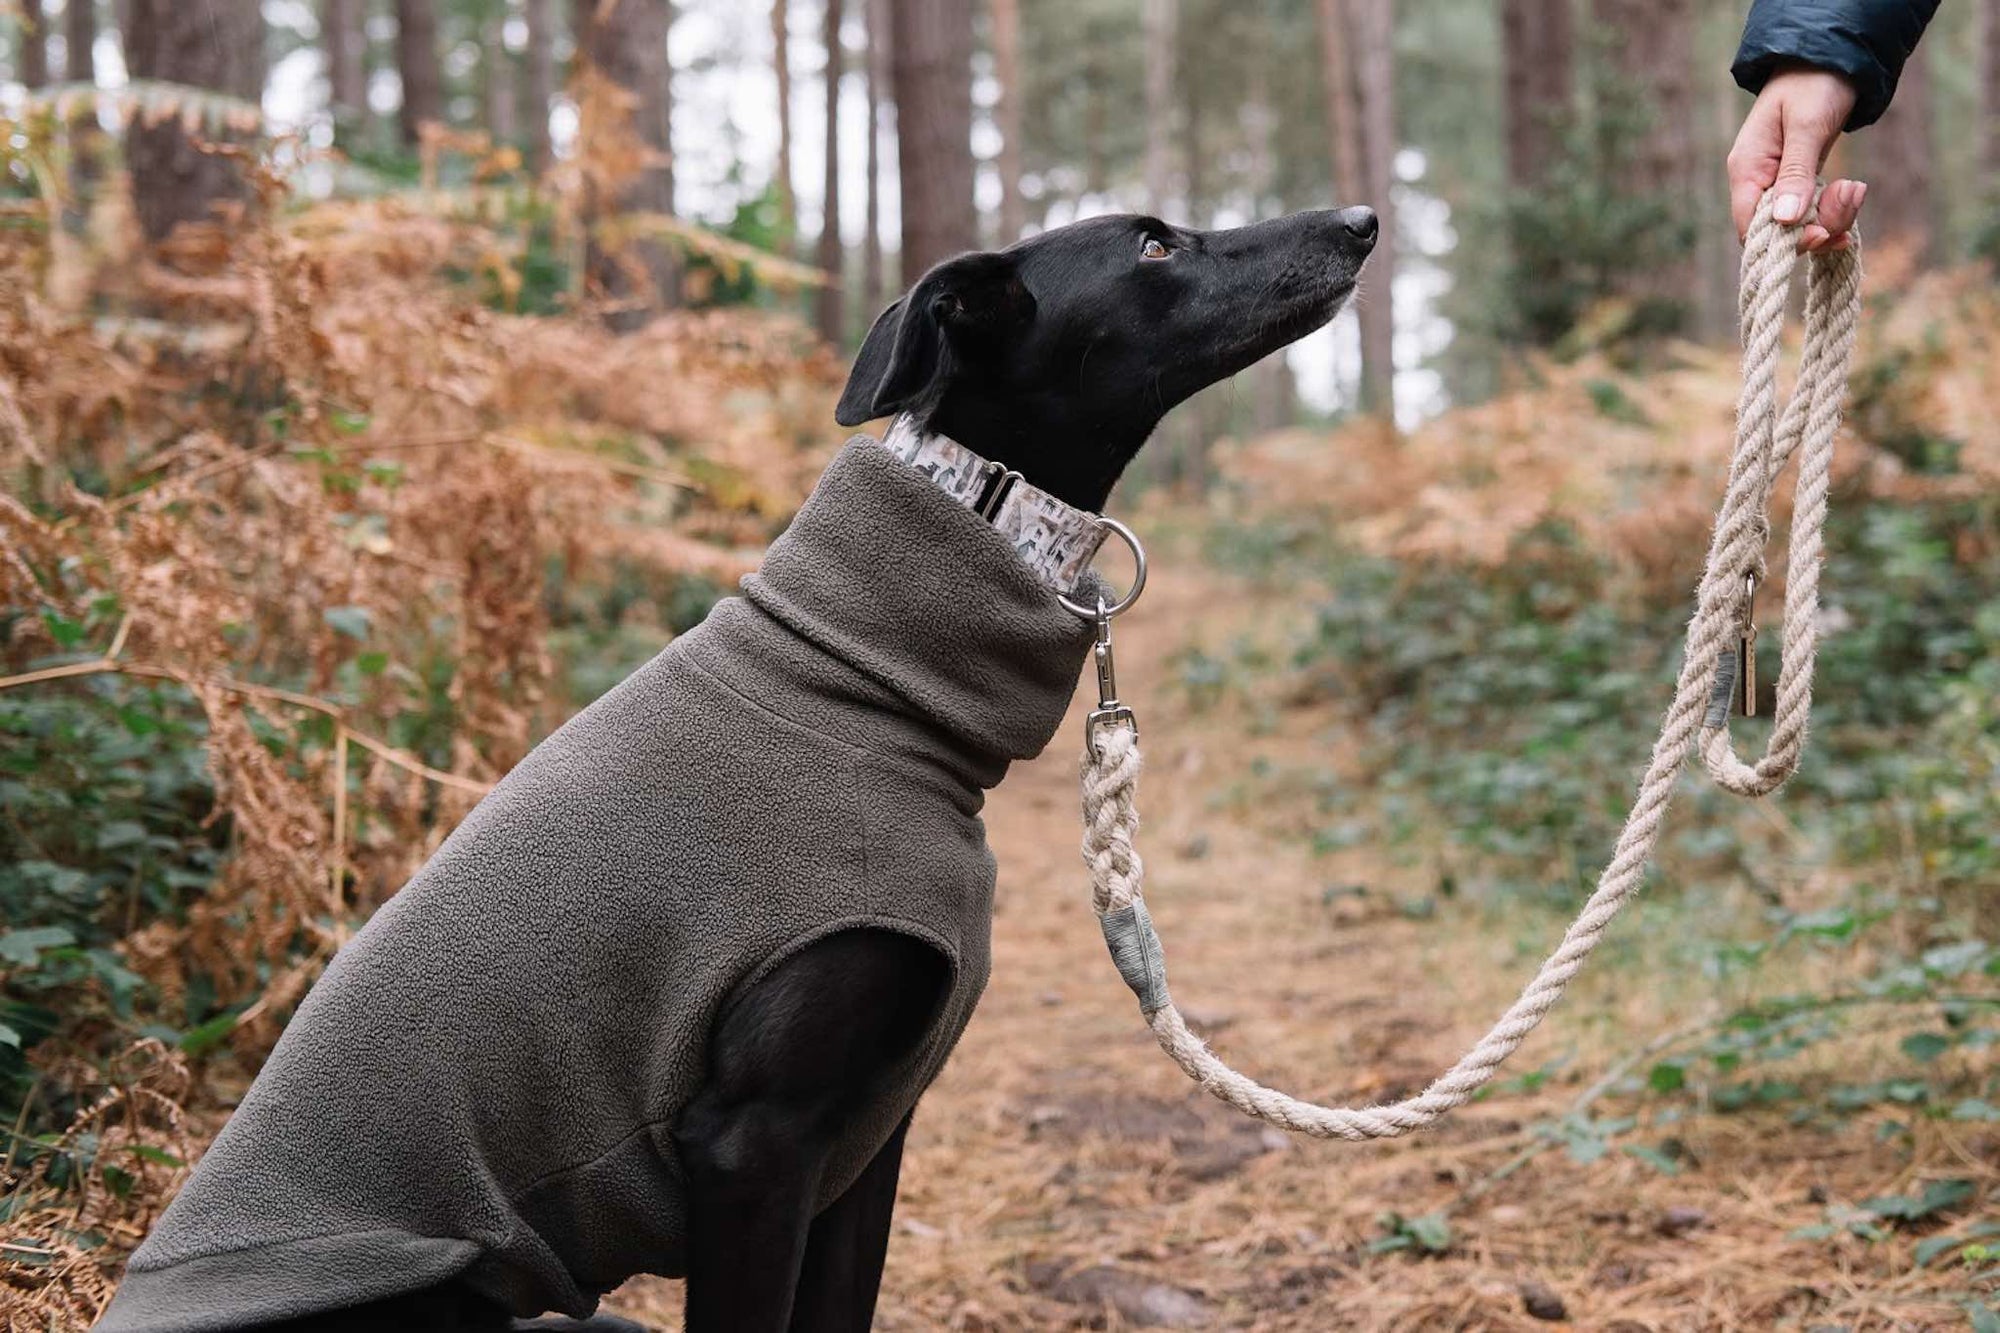 How long should my dog lead be?